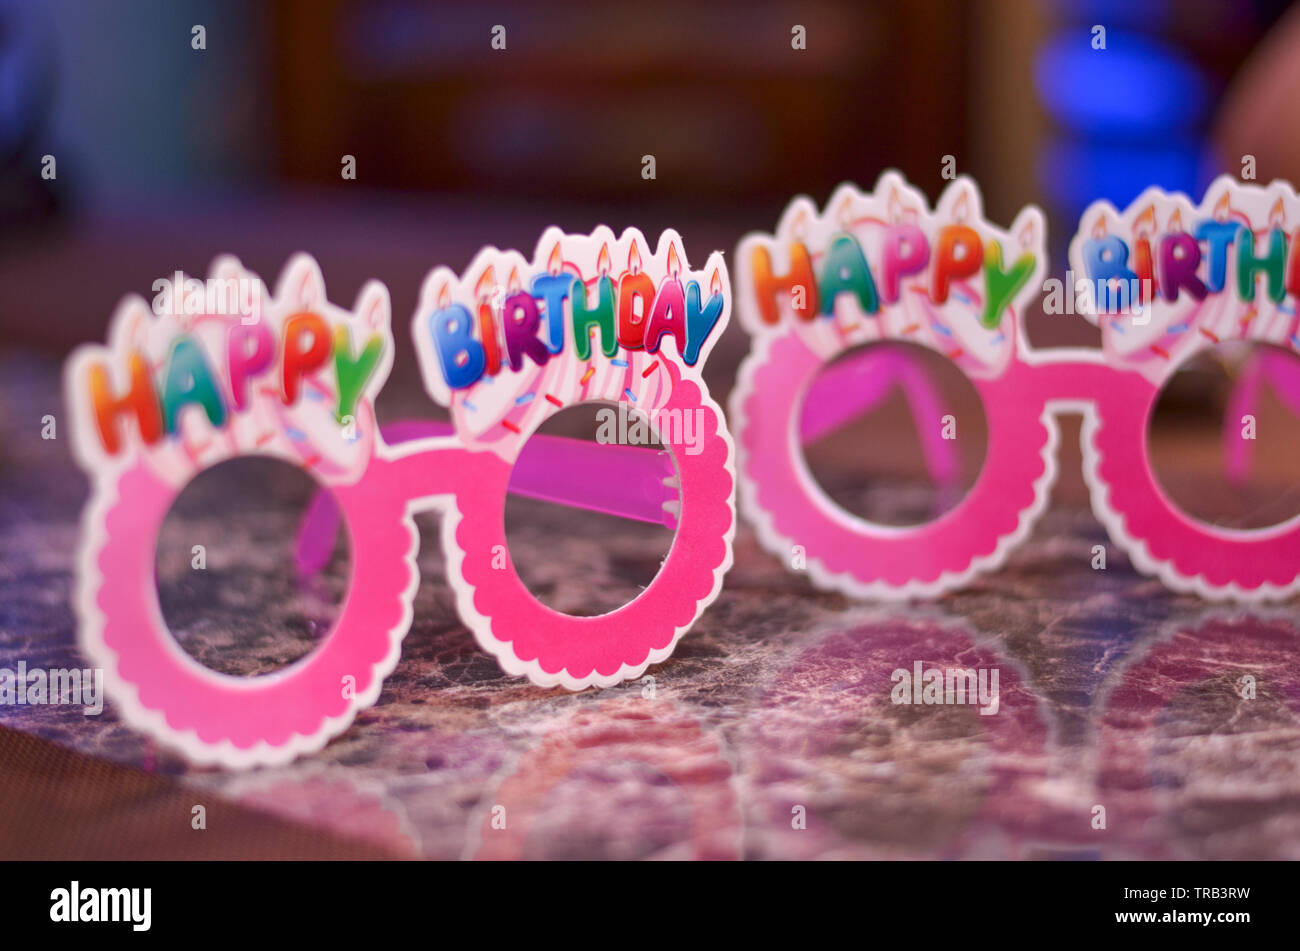 Pink goggles / specs made of cardboard / paper with happy birthday written on top. Stock Photo